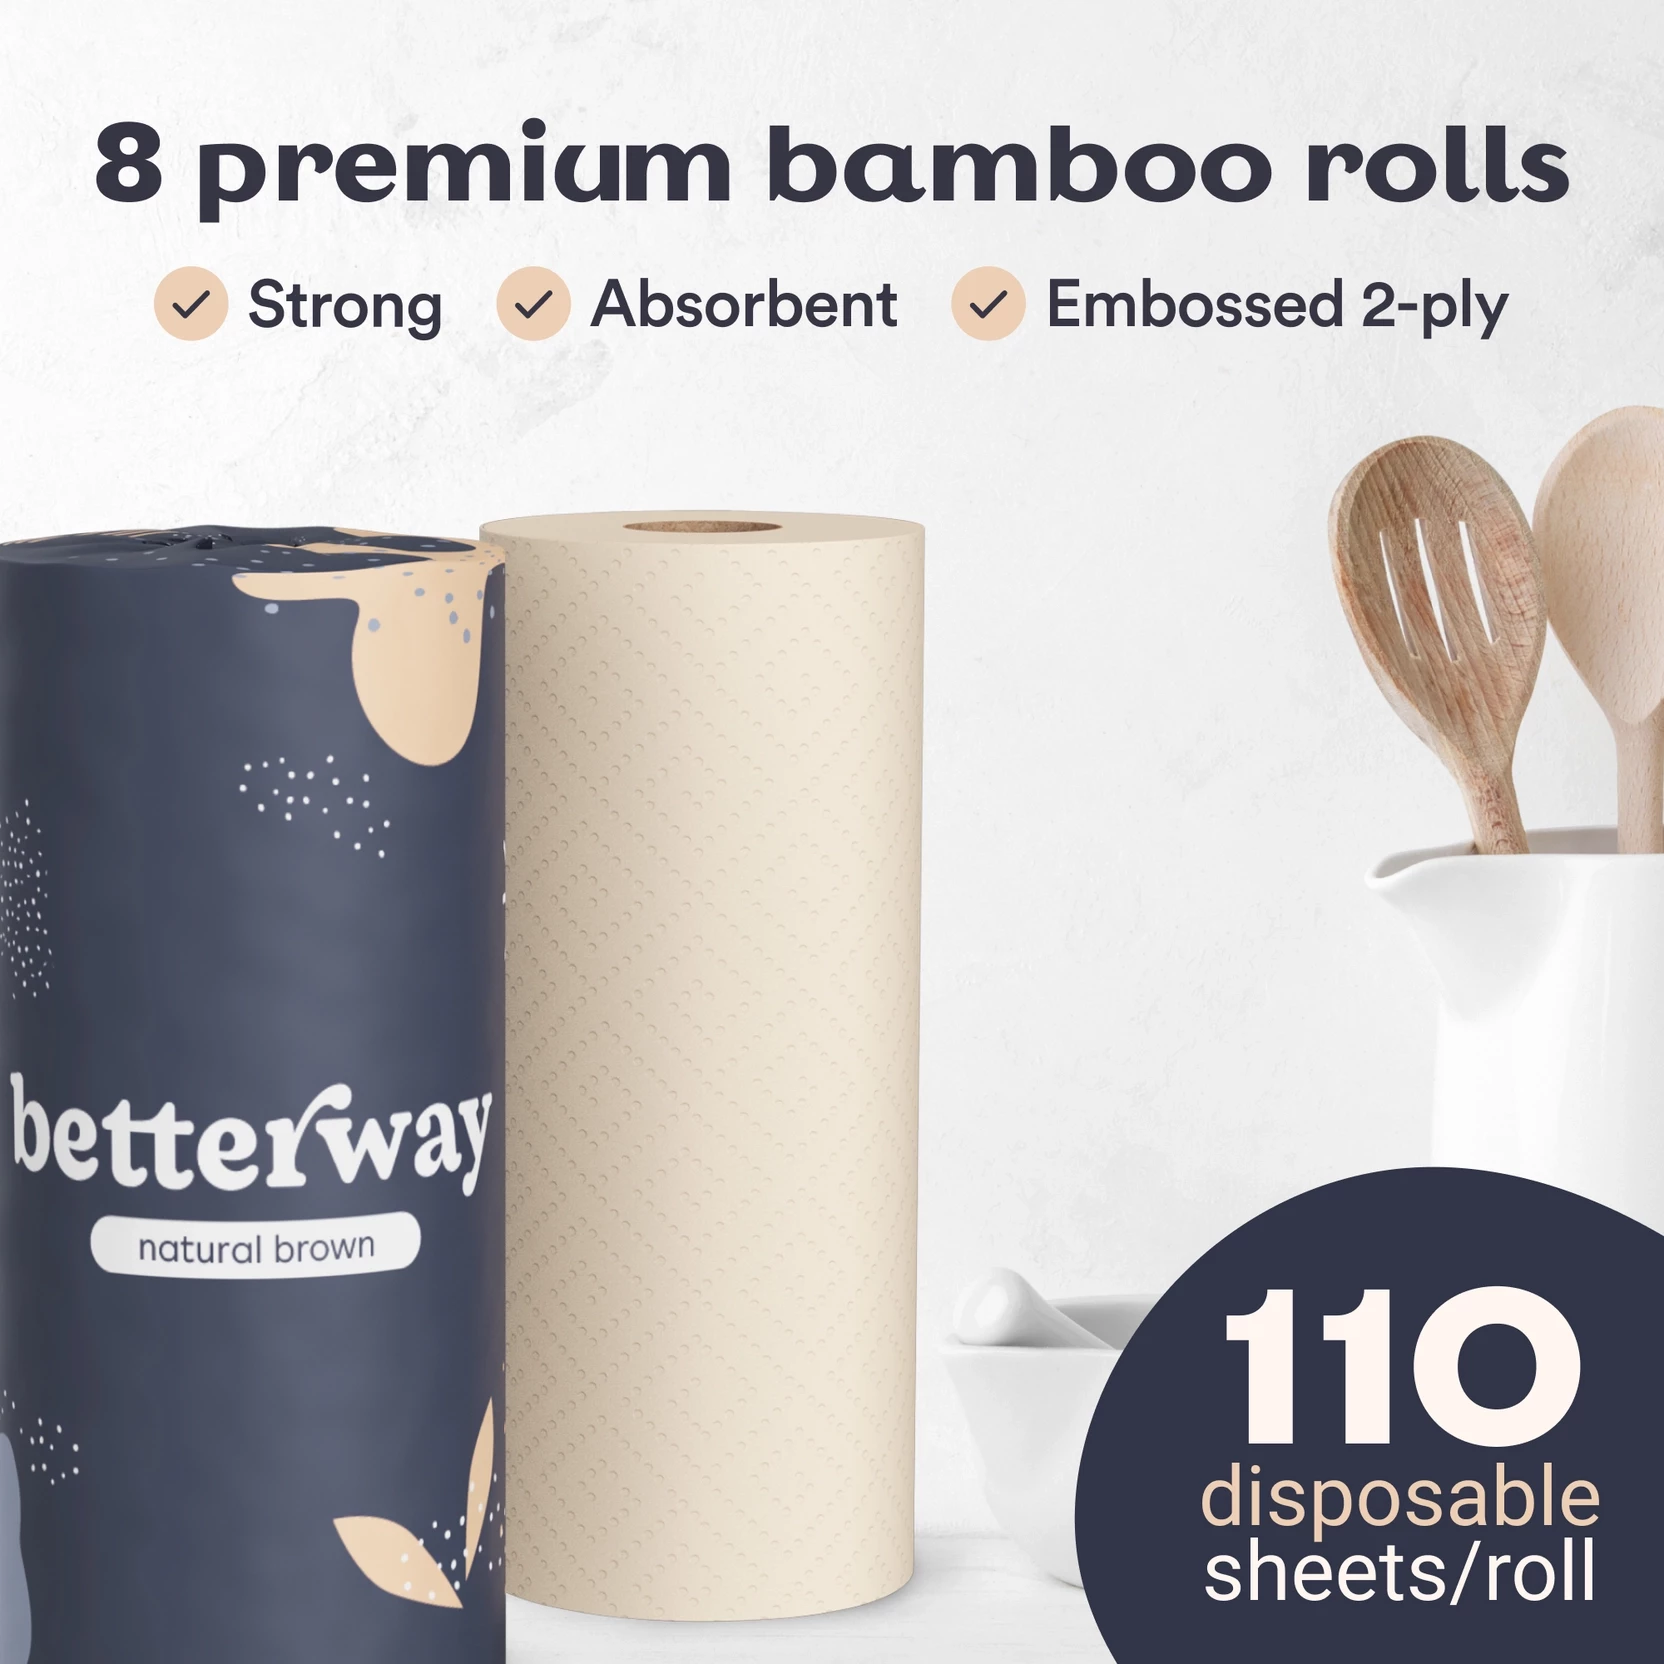 bamboo paper towels infographic with the words - 8 premium bamboo rolls - strong - adsorbent - embossed 2-ply - 110 disposable sheets per roll